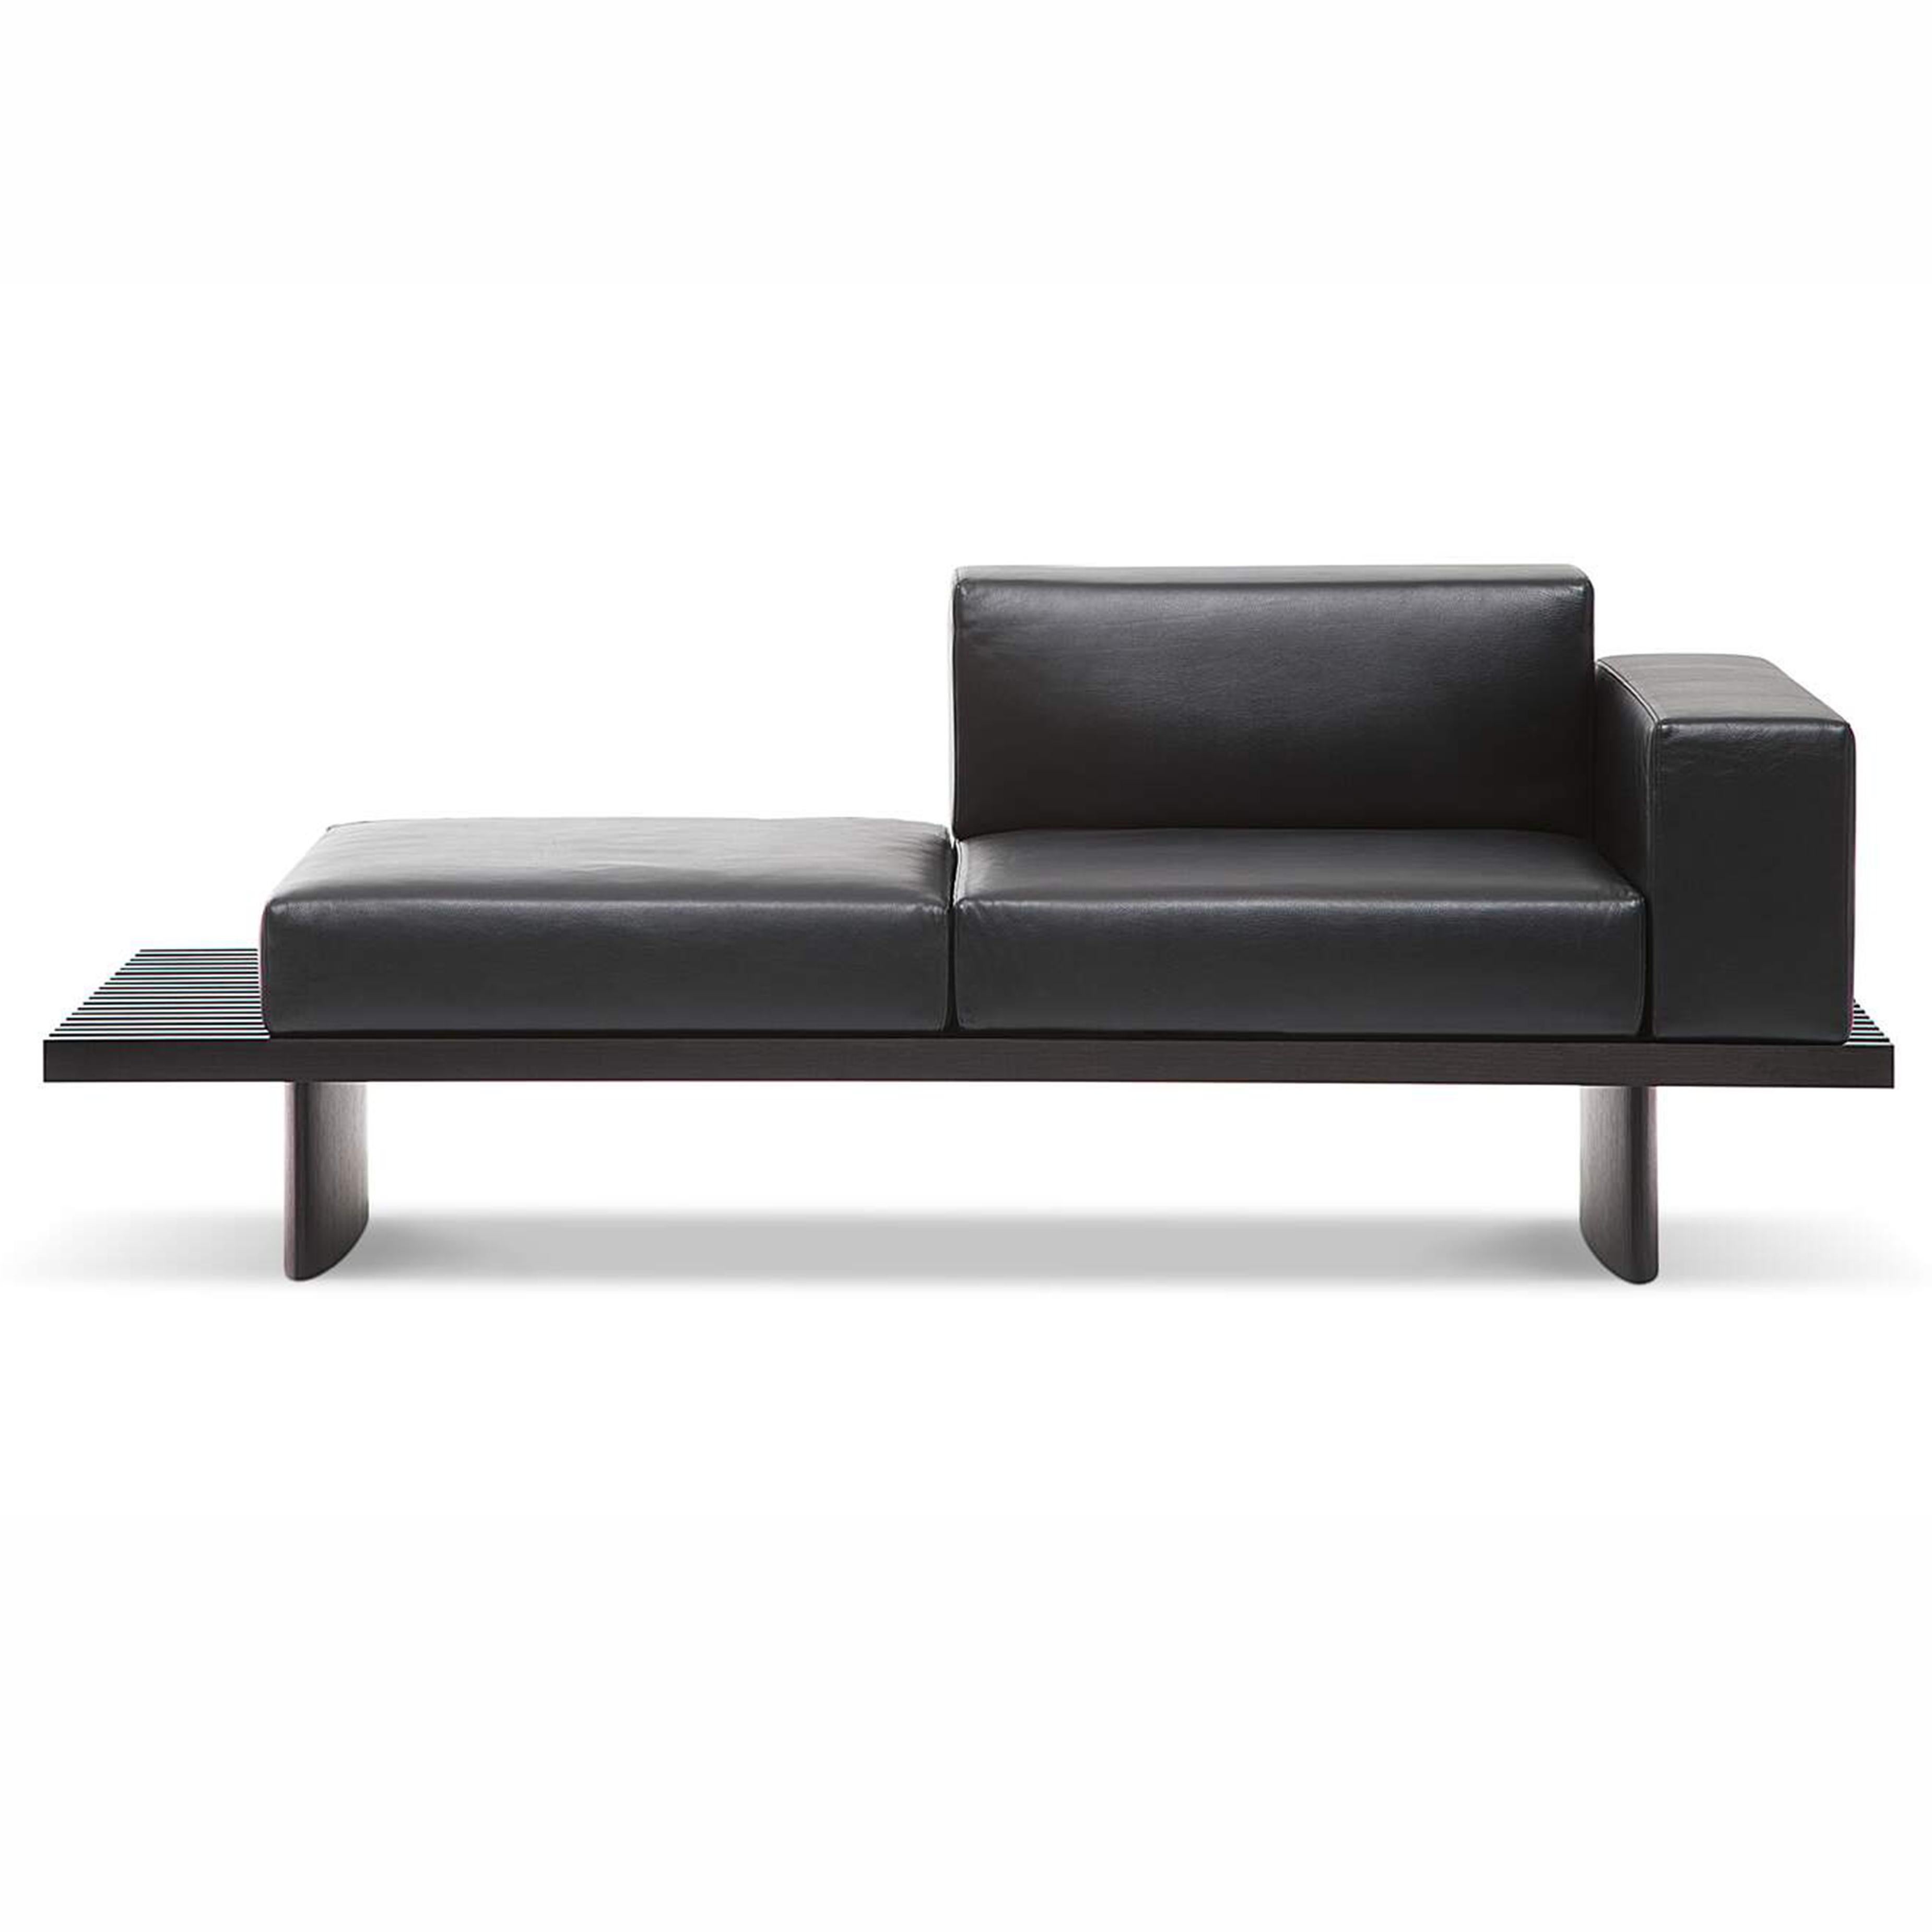 Charlotte Perriand Refolo Modular Sofa, Wood and Black Leather by Cassina For Sale 3